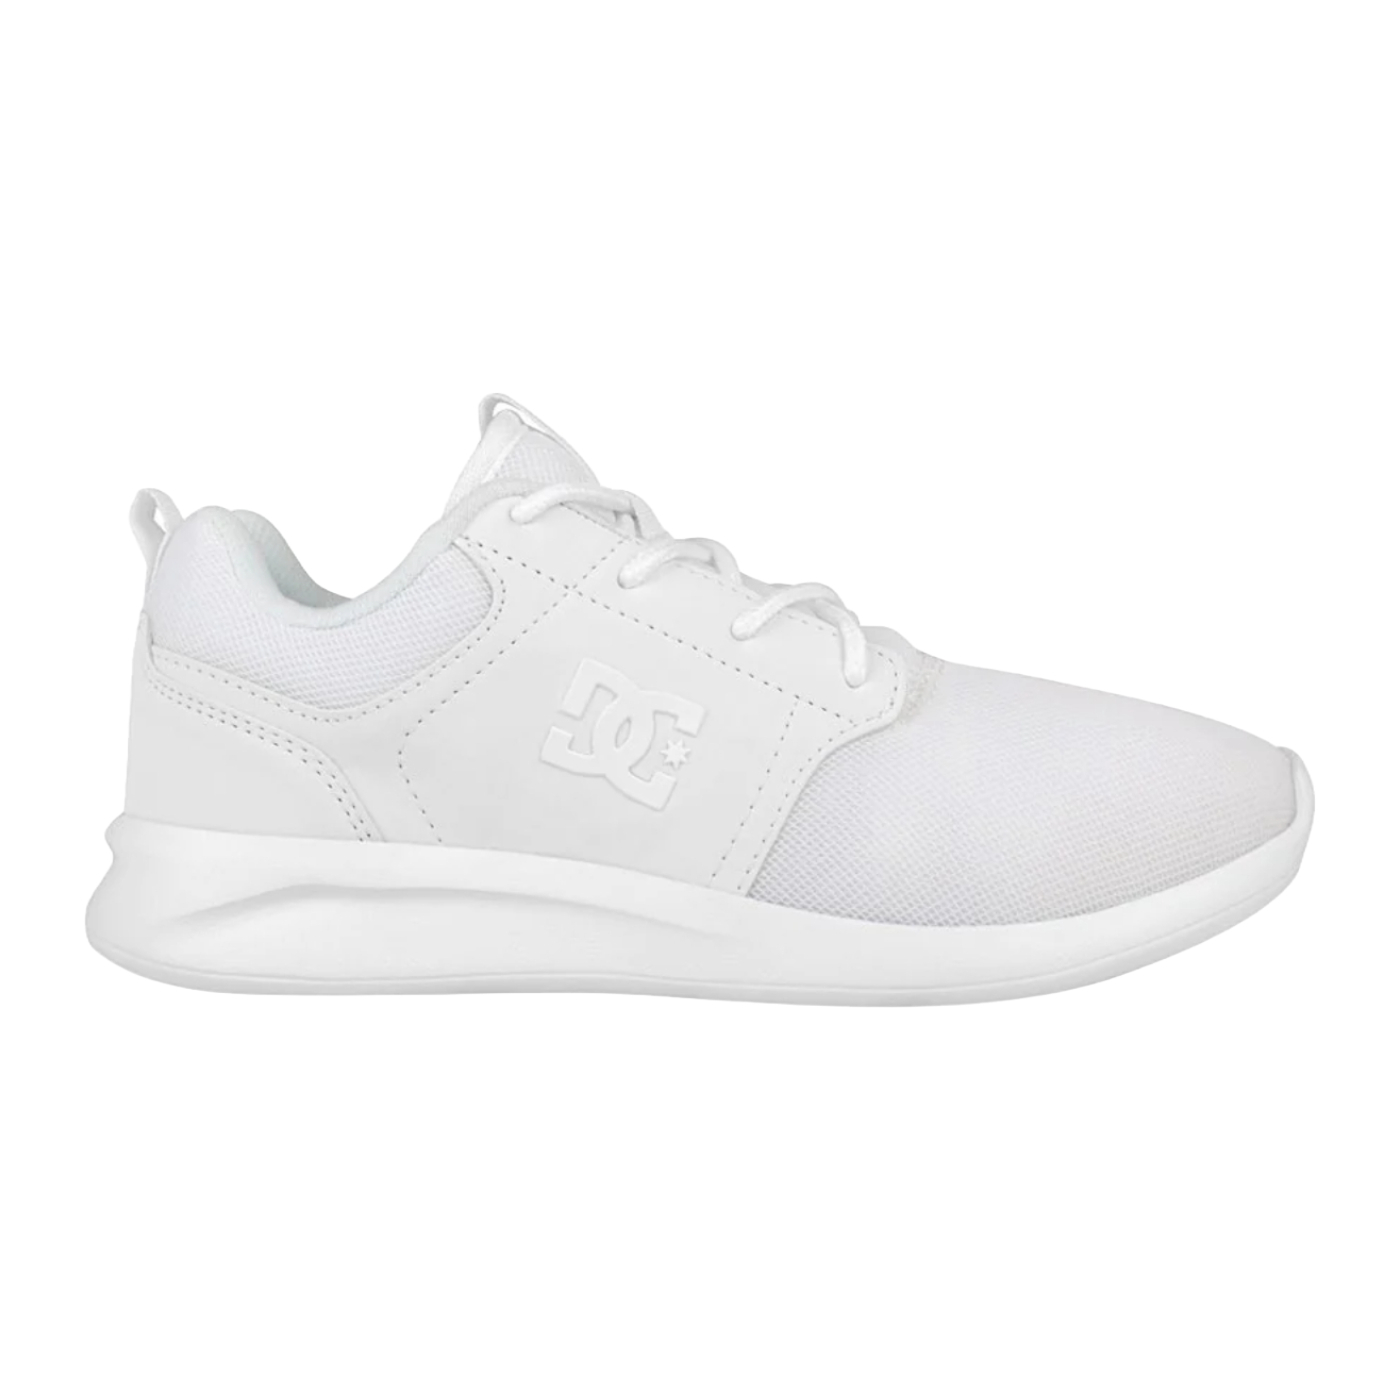 TENIS DC SHOES MUJER BLANCO DC SHOES MIDWAY ADJS700100WW0